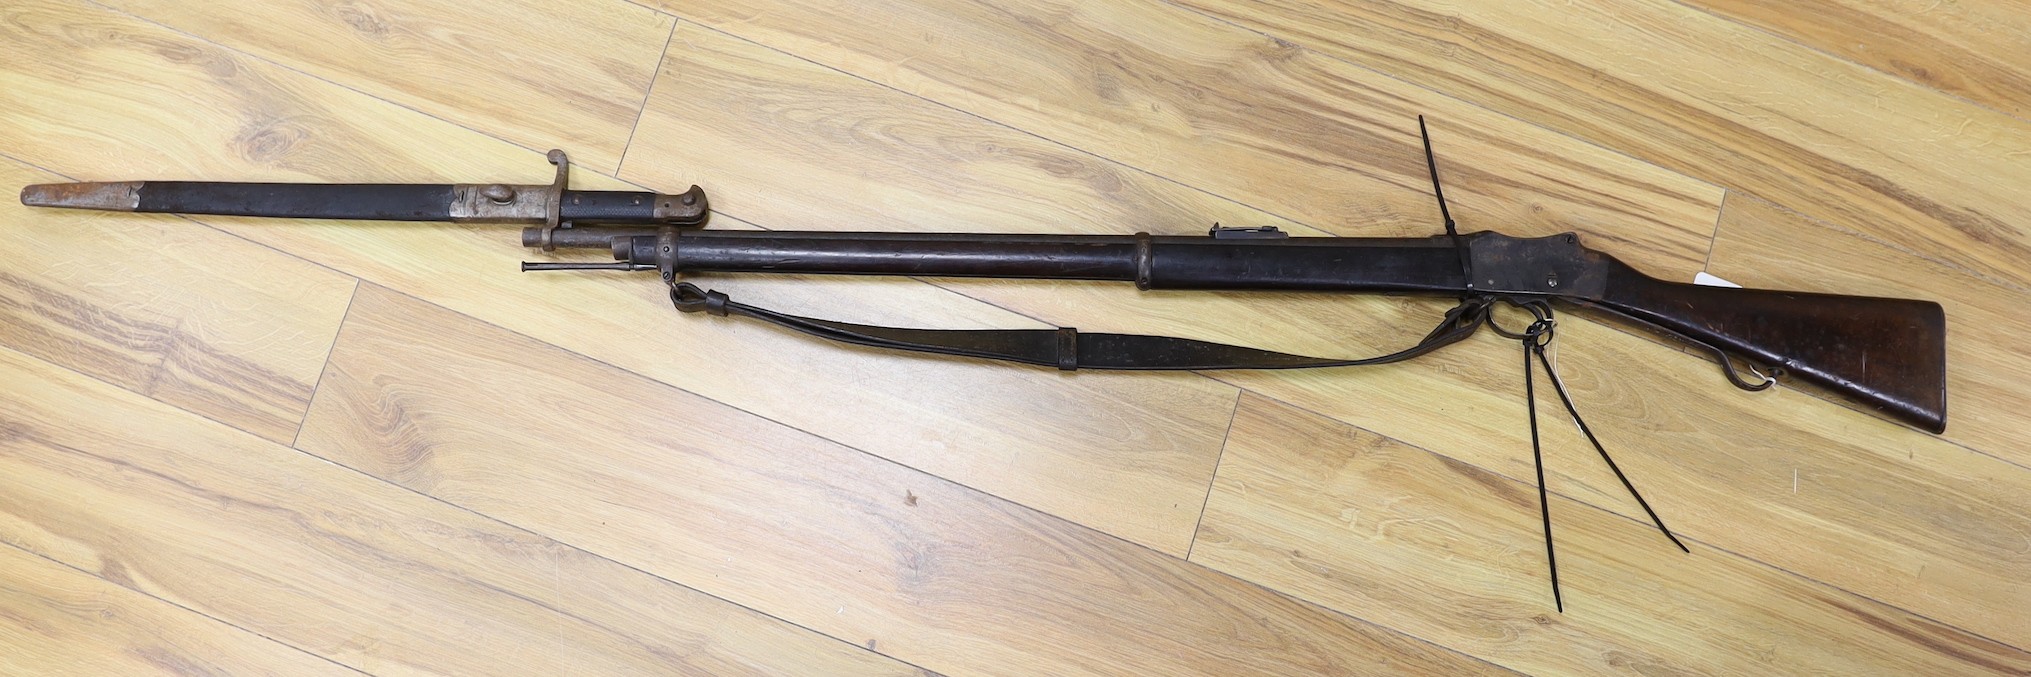 An Enfield breech loading .577 calibre rifle dated 1886, with Wilkinson bayonet and sheath